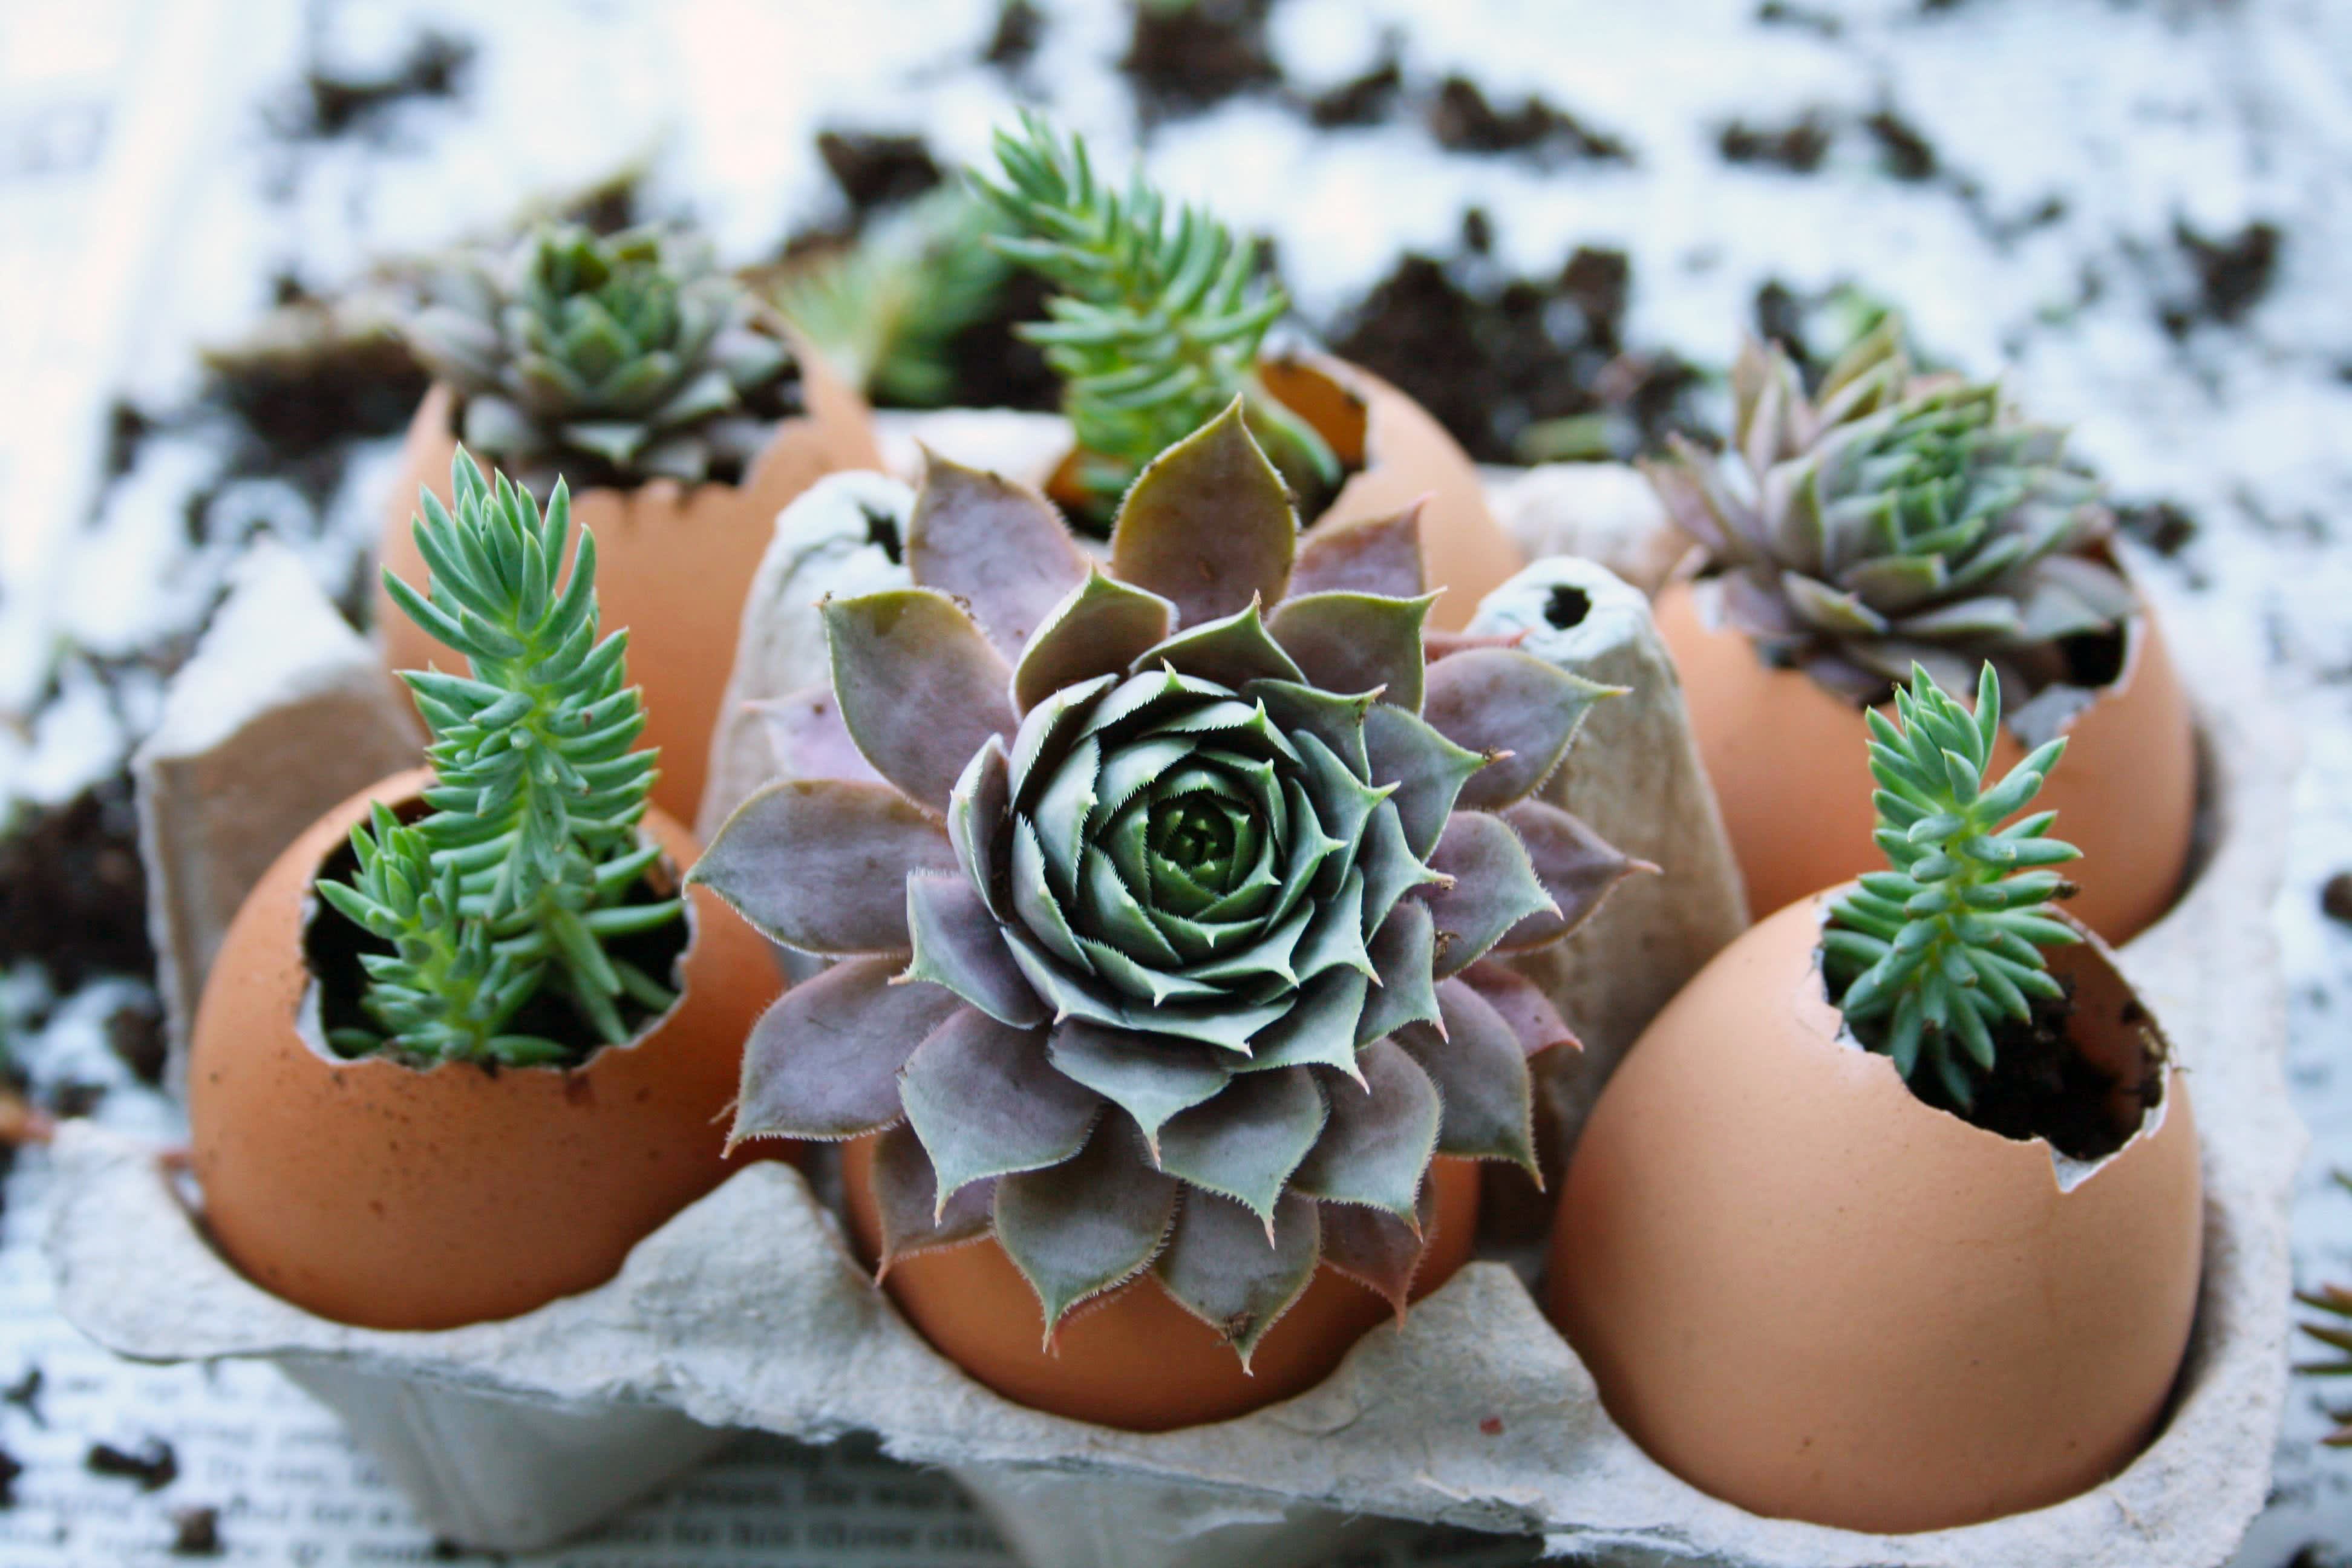 How To Plant Succulents in Eggshells | The